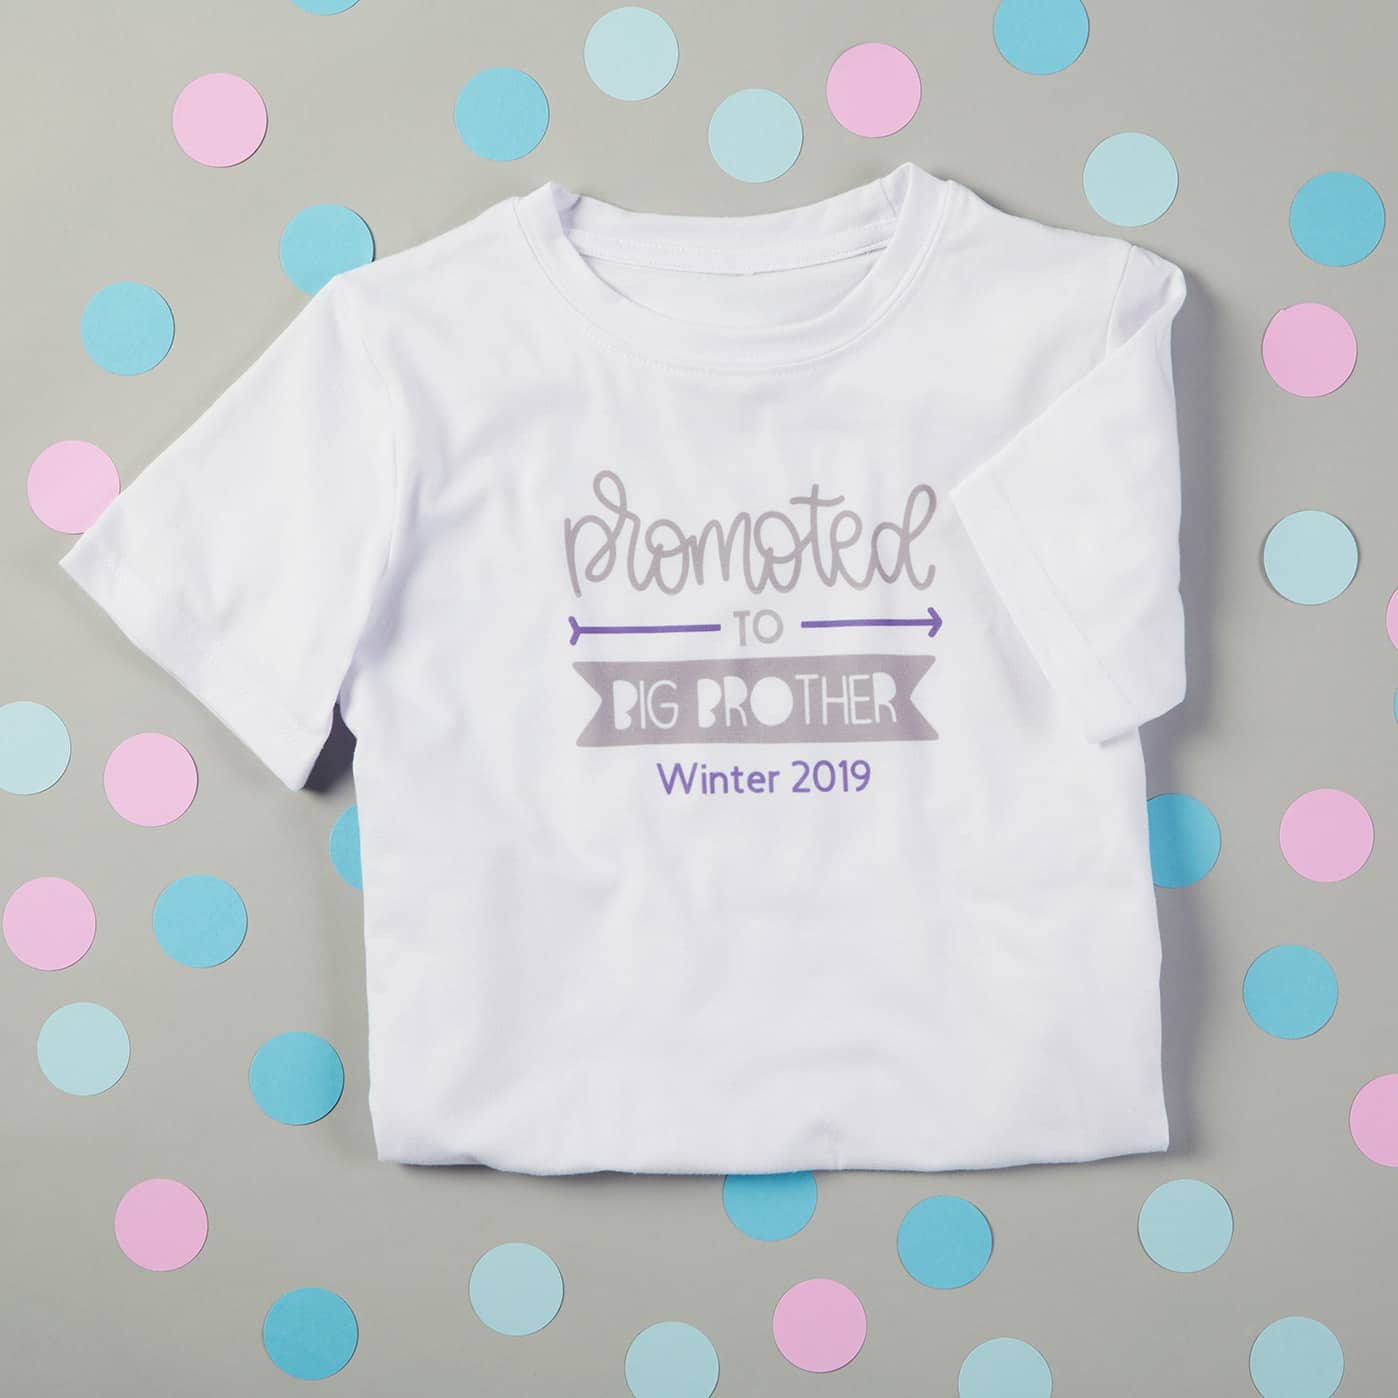 Easy Steps for Making Toddler T-Shirts with Cricut Infusible Ink